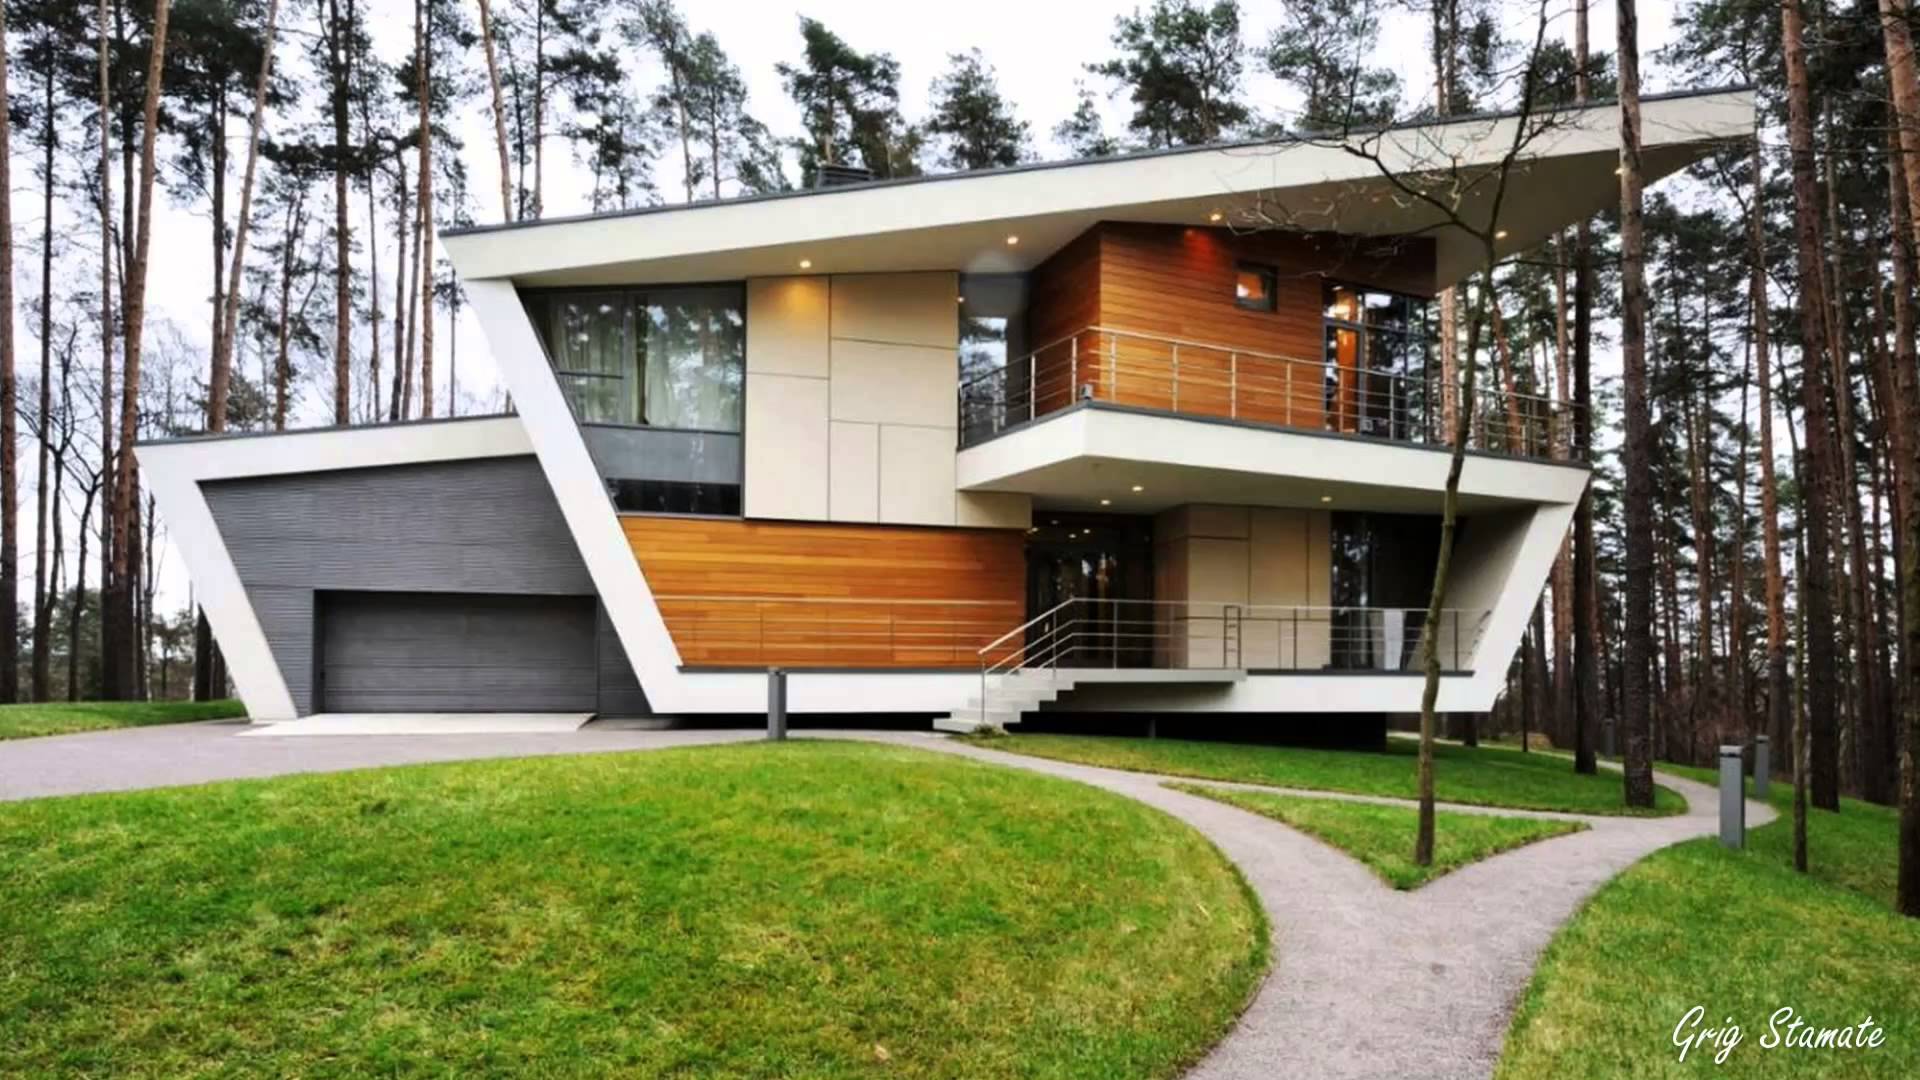 unique ideas modern home designs ingenious and house youtube HLNWIWY